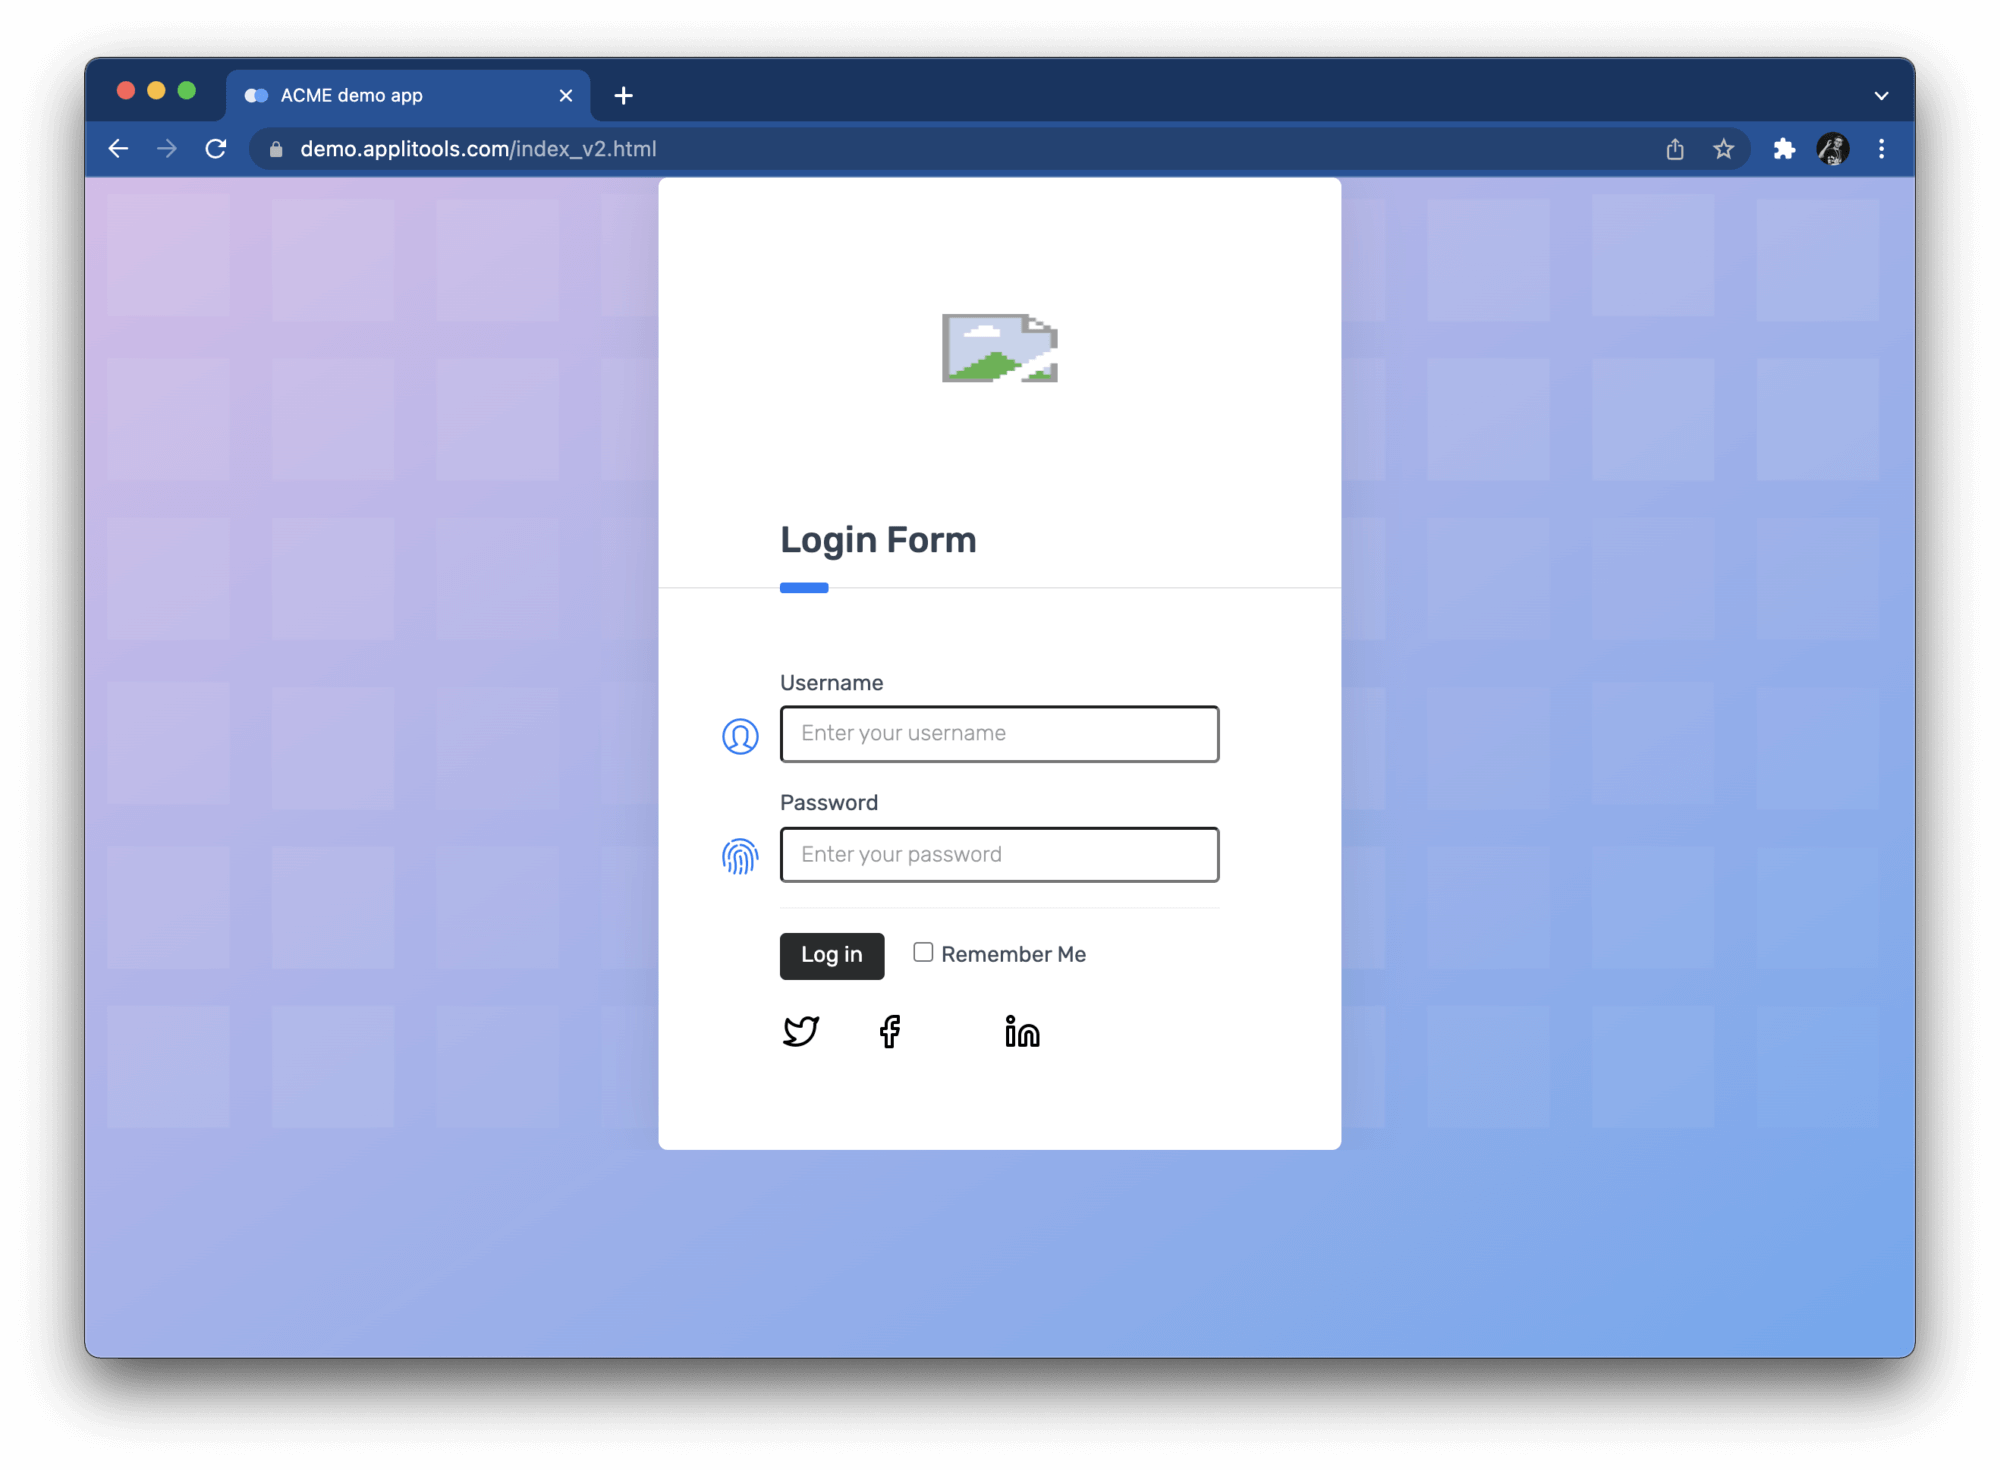 Demo login form including logo, username and password, with broken icon for logo and different login button.